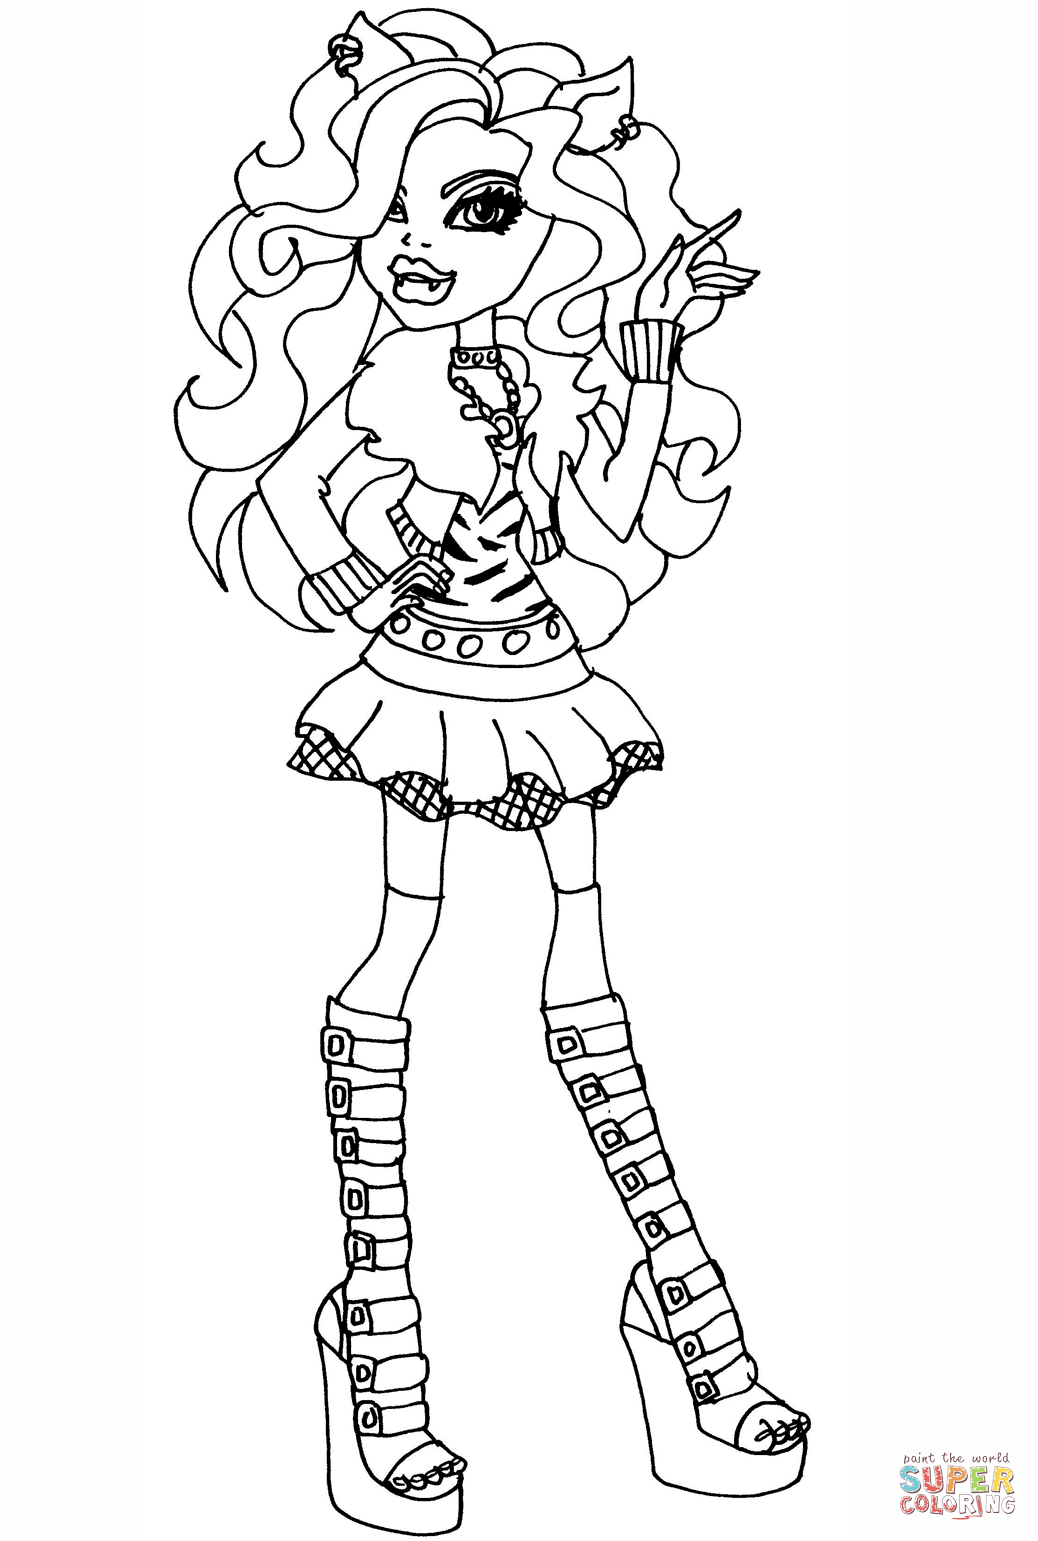 Monster High Clawdeen Wolf Coloring Page | Free Printable Coloring Pages - Monster High Free Printable Pictures